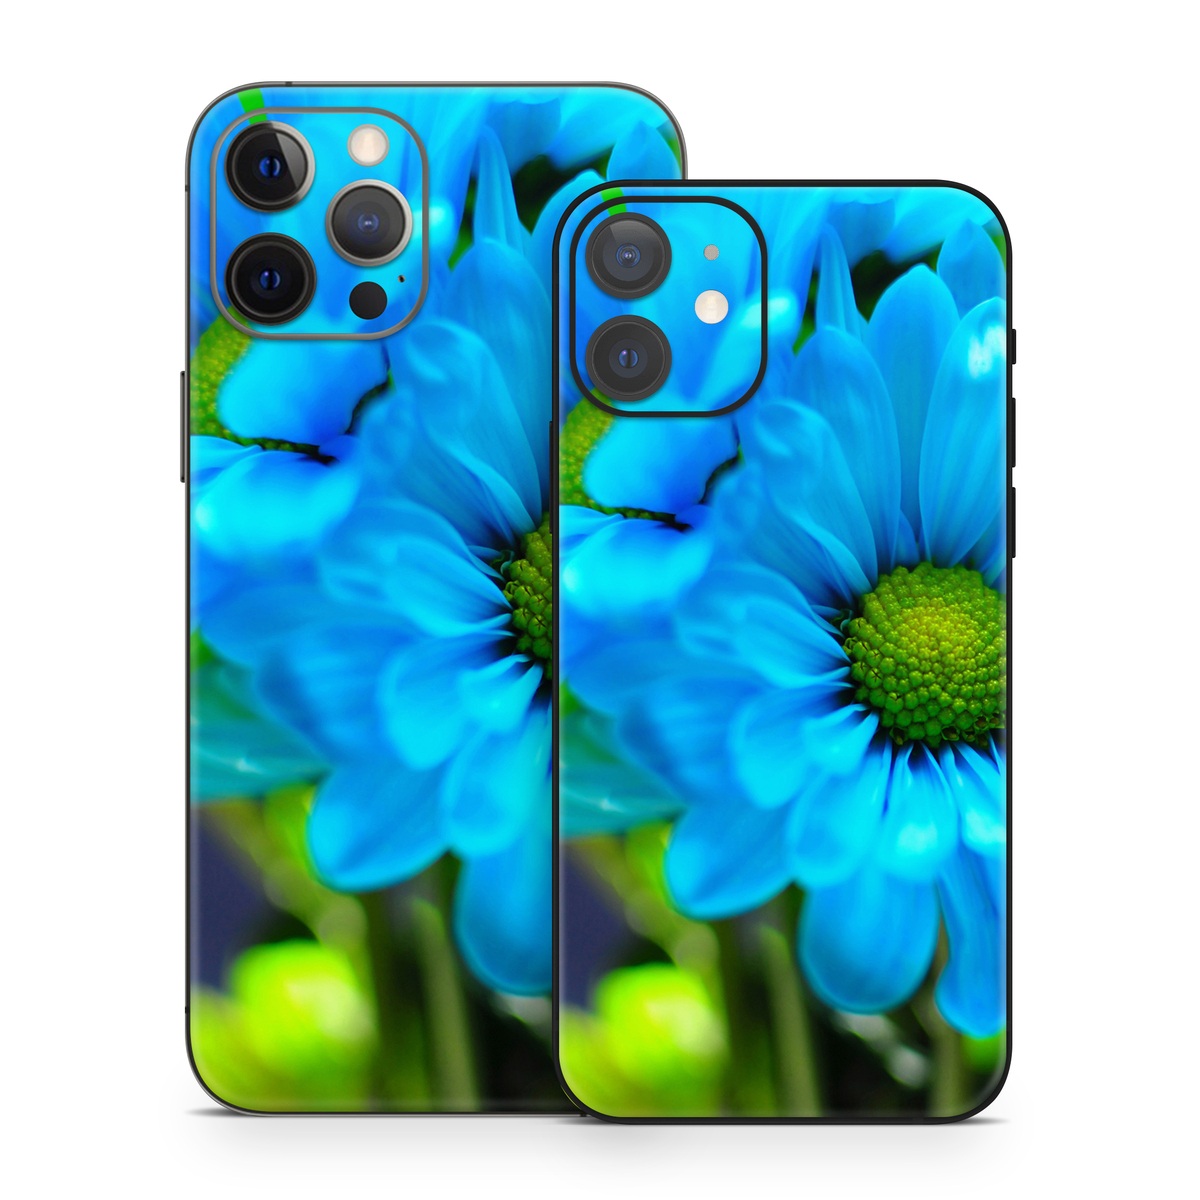 iPhone 12 Series Skin design of Blue, Flower, Petal, Green, Plant, Cobalt blue, Yellow, Flowering plant, Gerbera, Electric blue, with blue, black, green colors